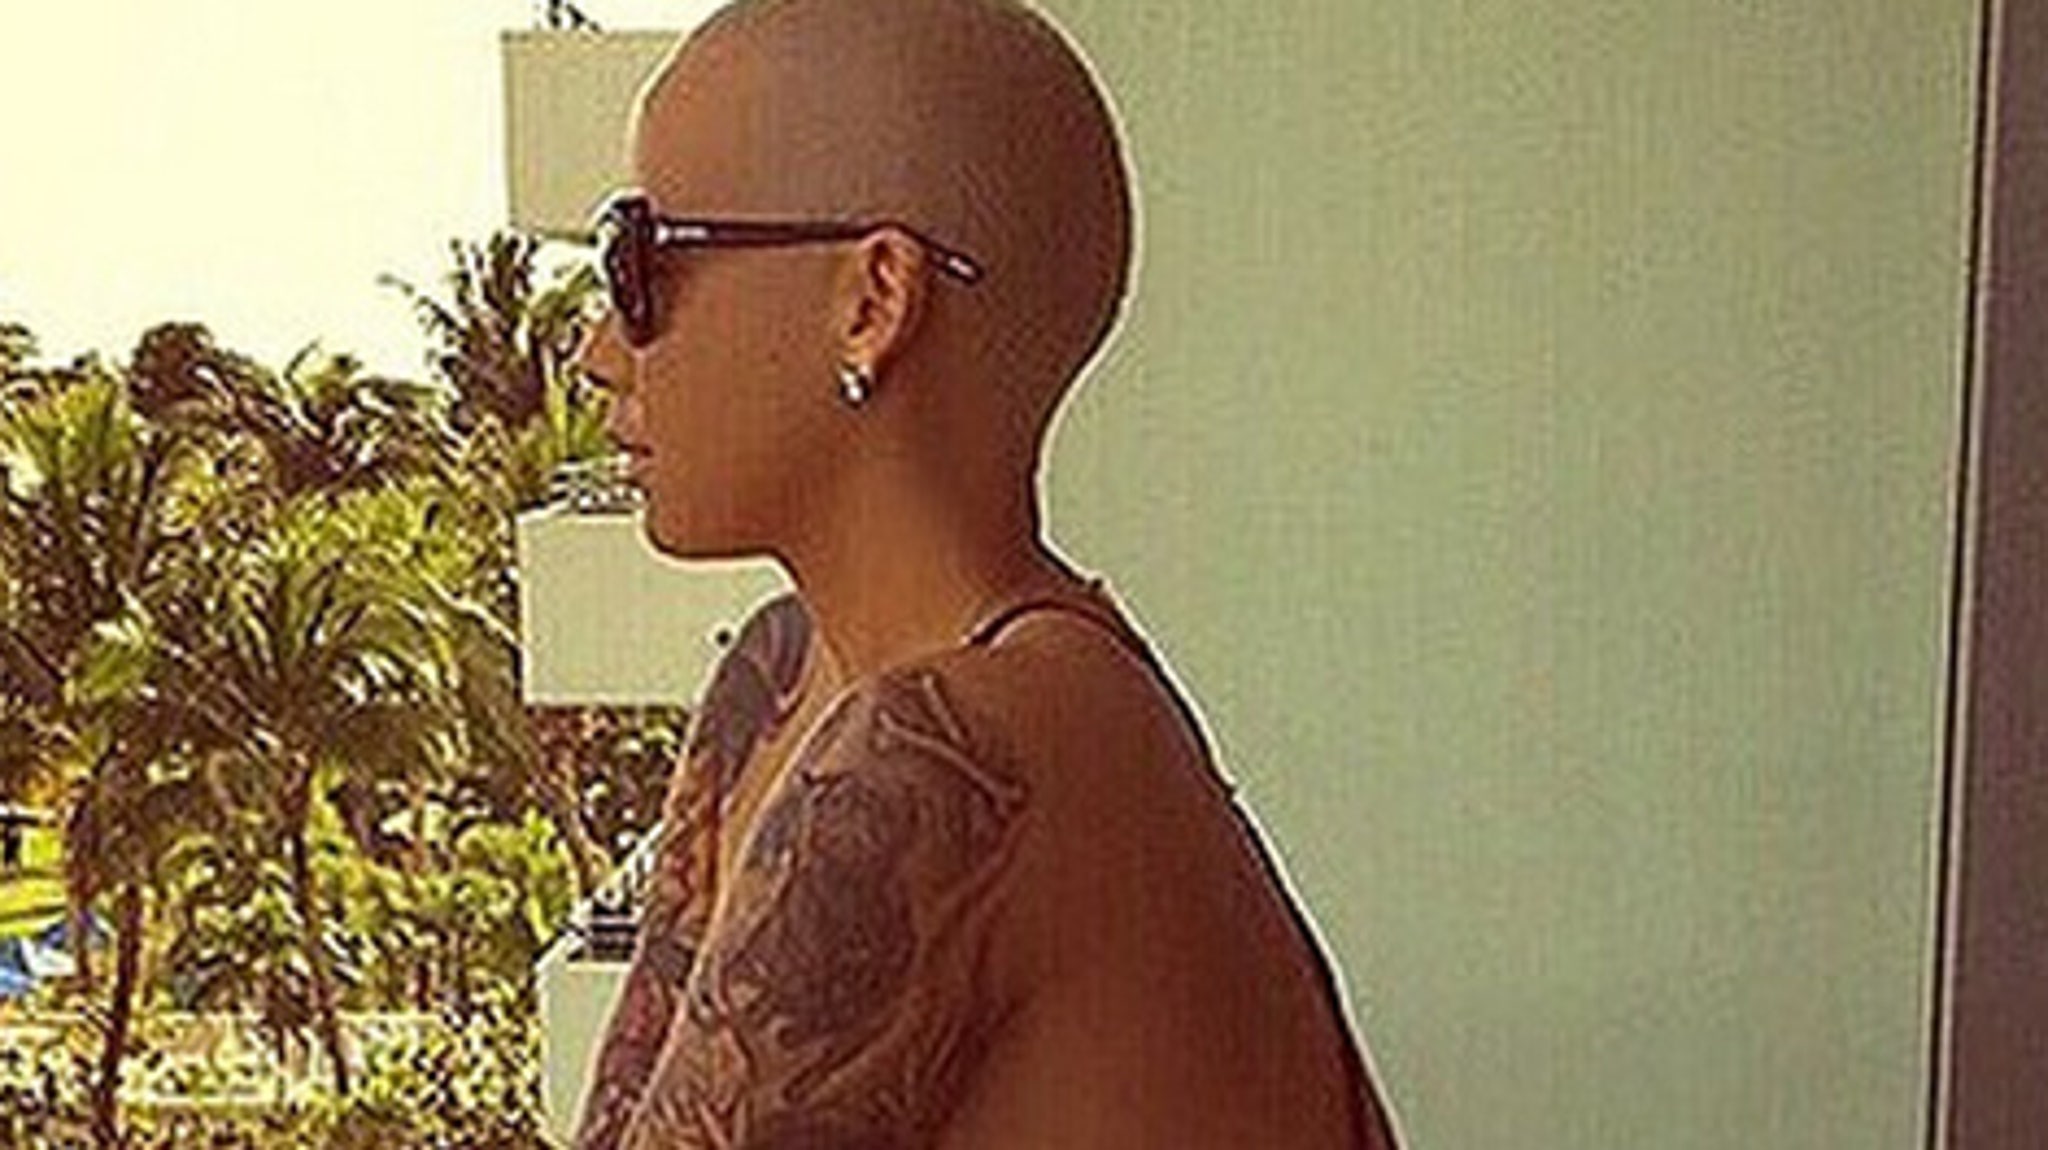 Amber Rose Puts All Her Curves On Display In Collection Of Extremely Skimpy Bikinis 